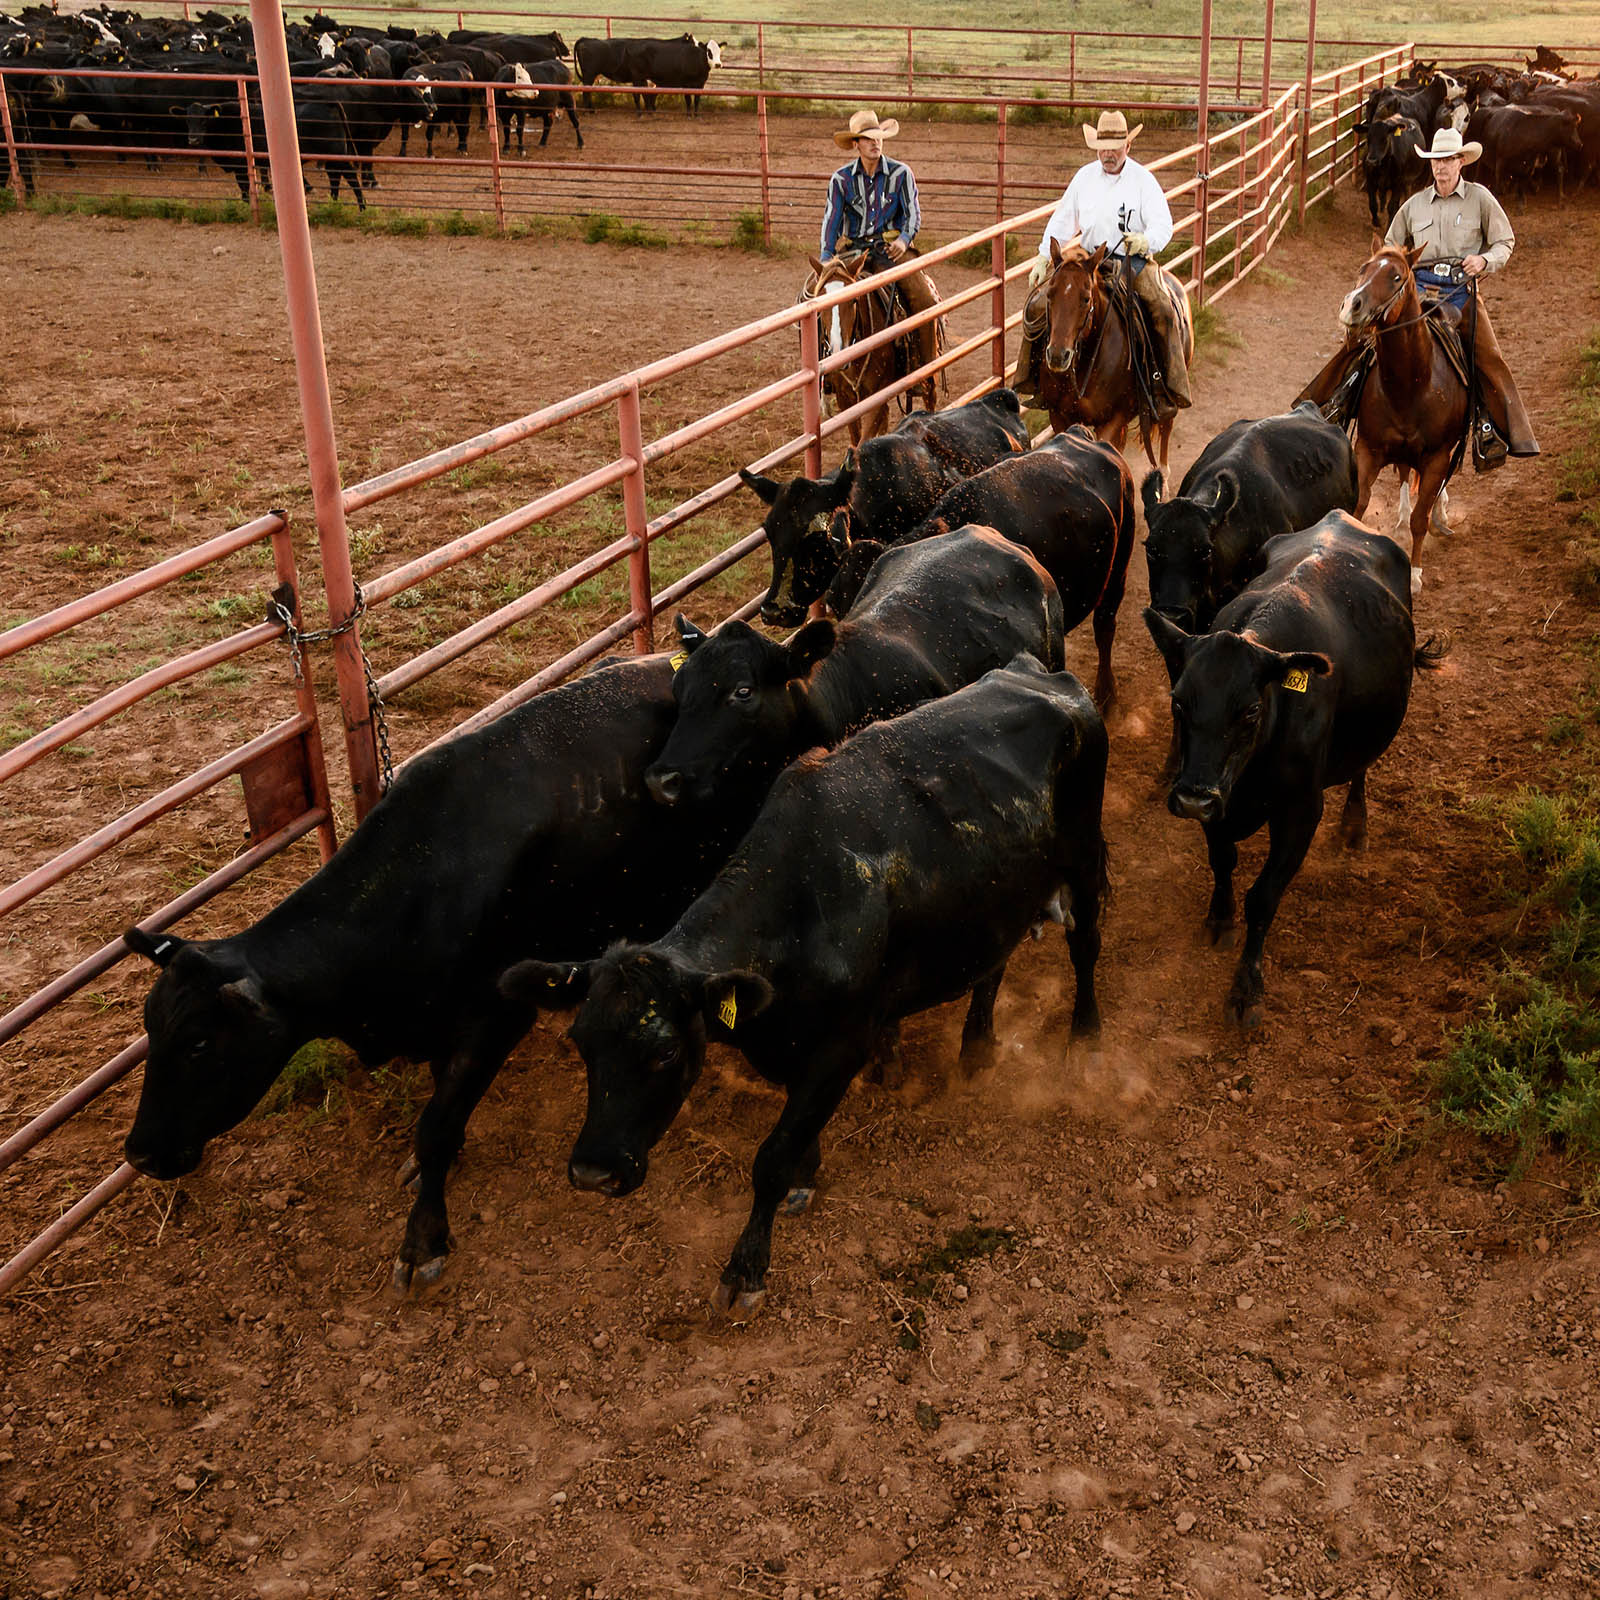 Producer Traceability Council Reaches Consensus on Key Elements to Increase Cattle Traceability in the U.S.